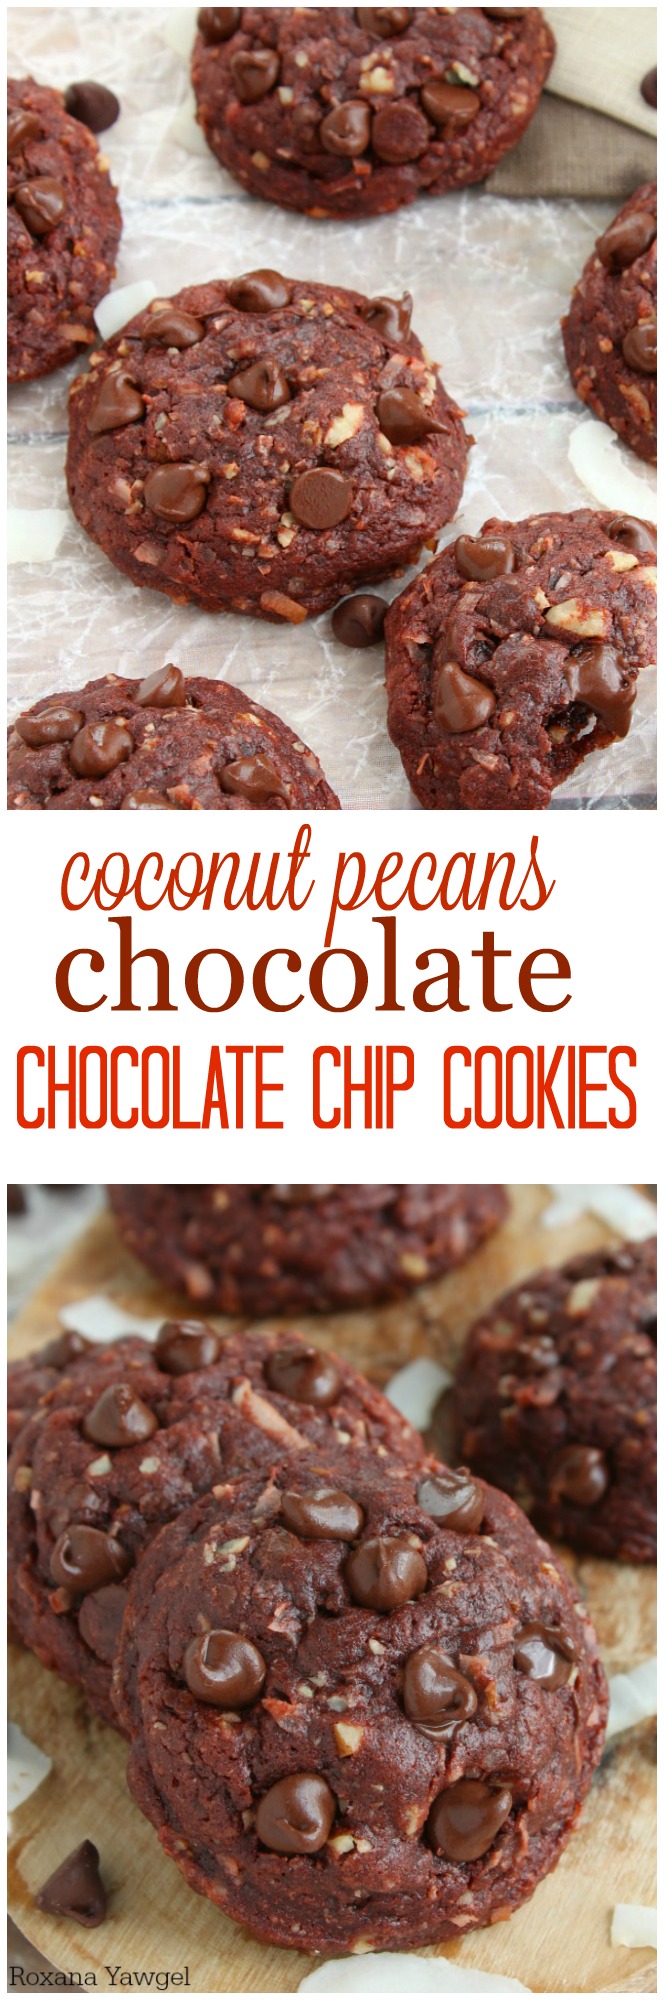 Thick, puffy and pillowy soft, fudgy and oozing with chocolate, these coconut pecans chocolate chocolate chip cookies will make you weak at the knees!